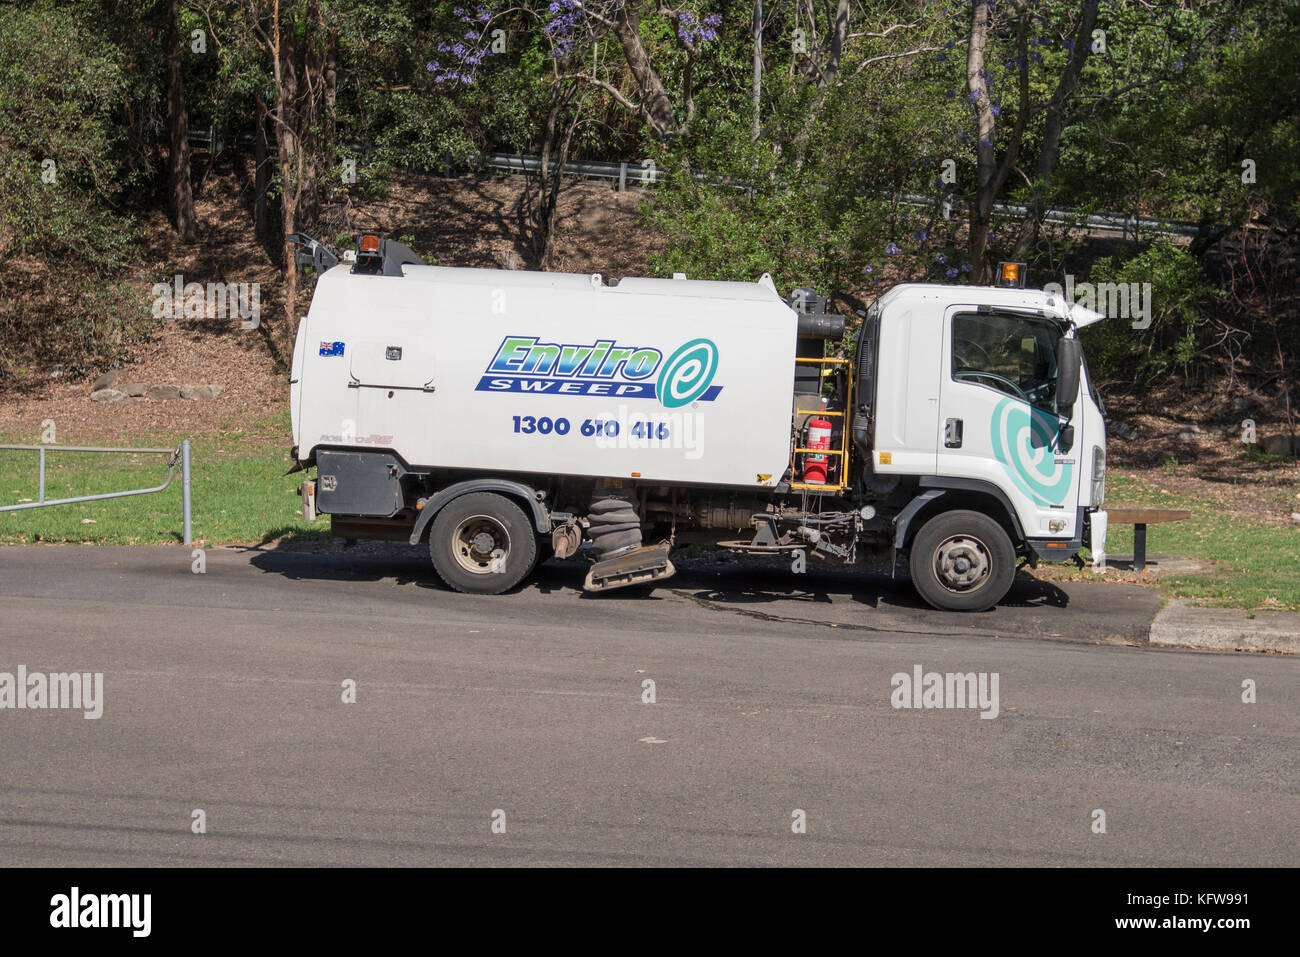 Enviro Sweep, road sweeping truck parked in Sydney, Australia Stock Photo